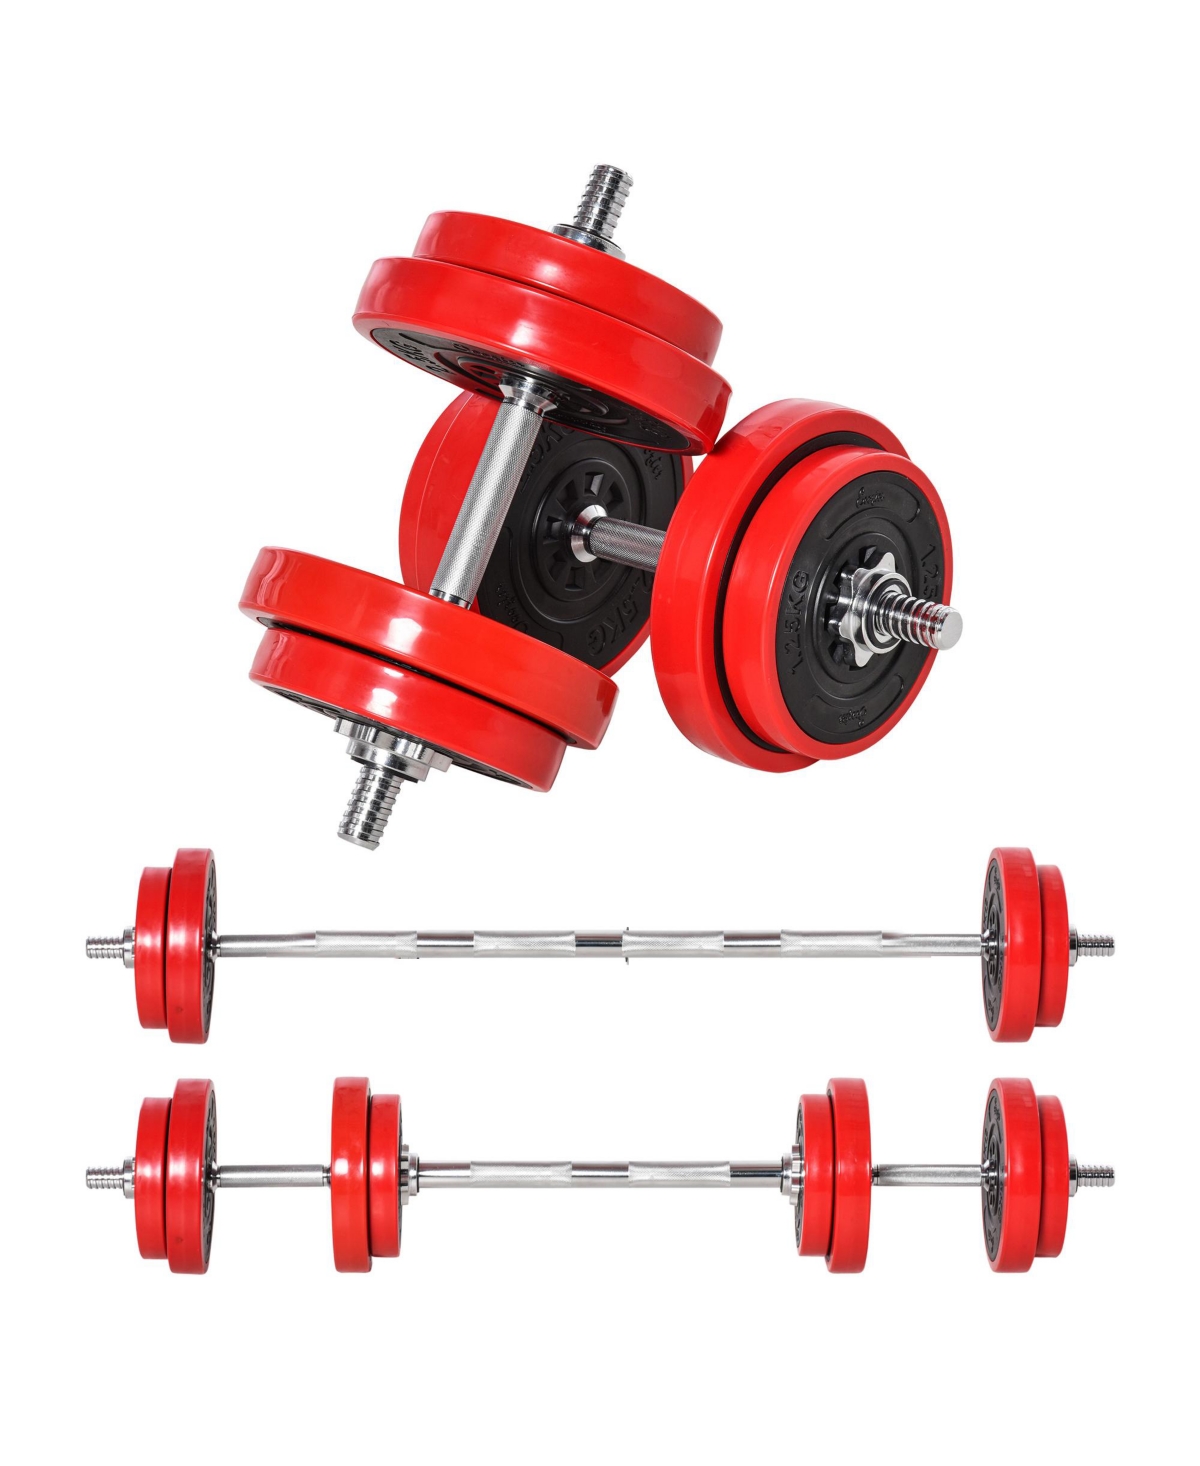 44 lbs 2 in 1 Dumbbell & Barbell Adjustable Weight Set Strength for Arms, Shoulders and Back - Red wine